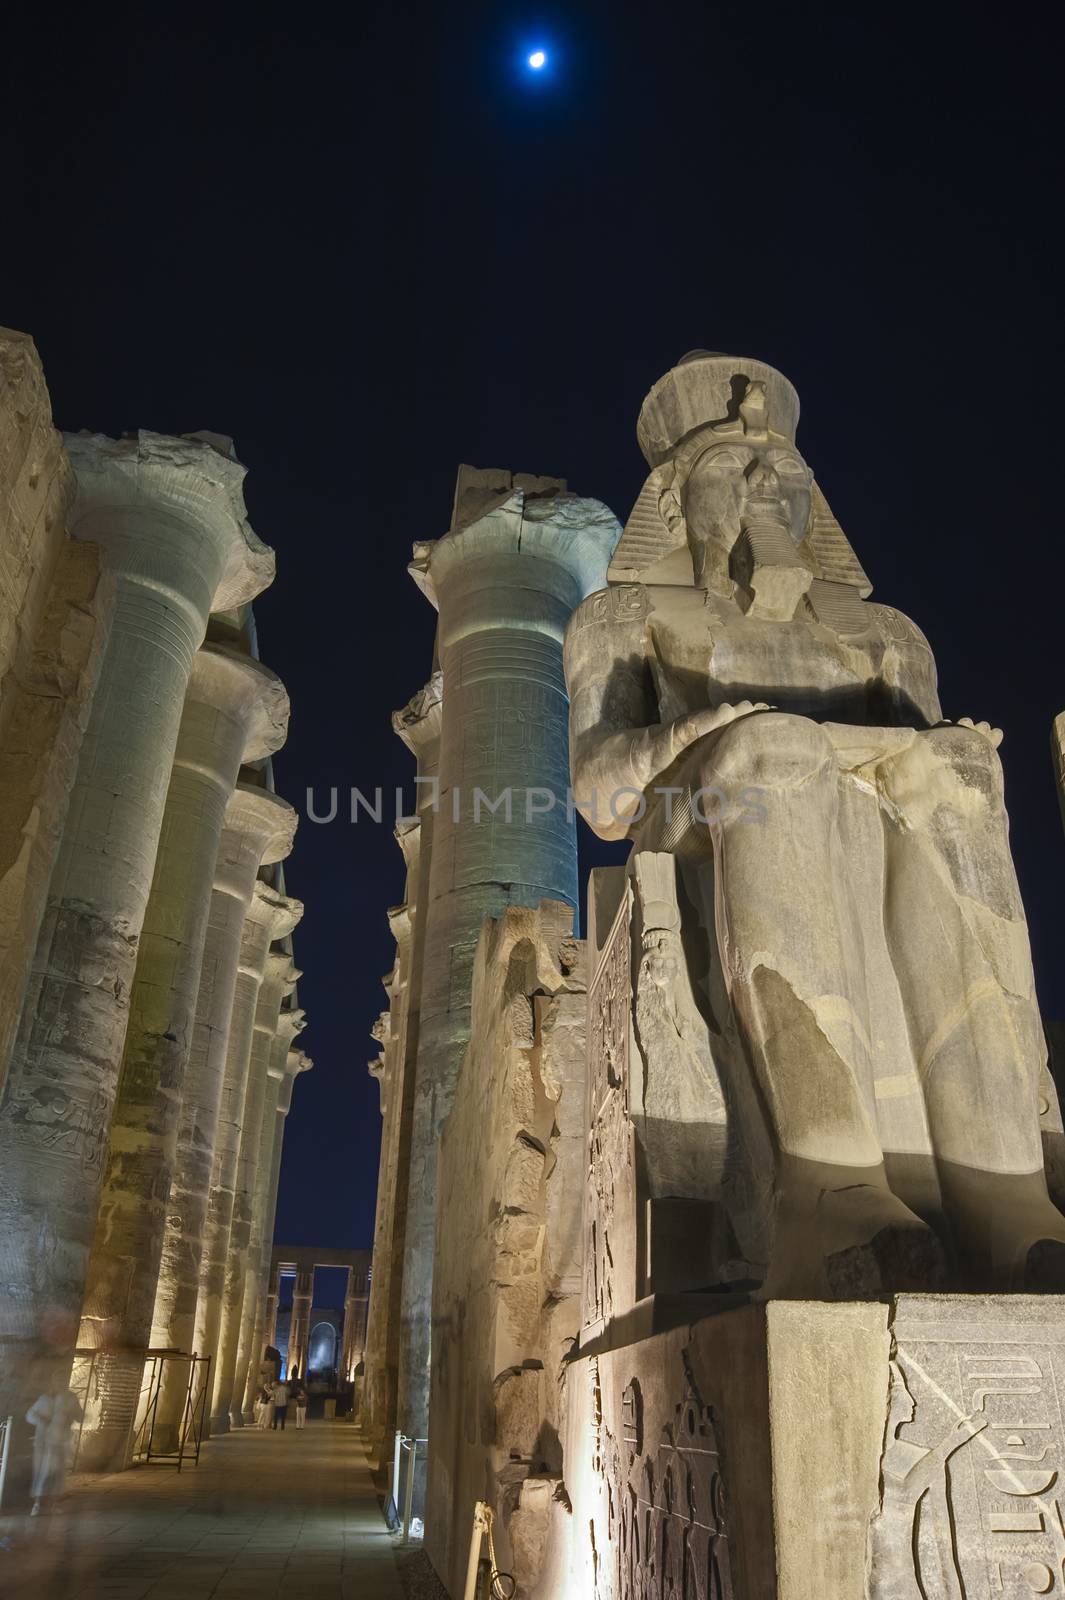 Statue and columns in hypostyle hall at Luxor Temple during nigh by paulvinten